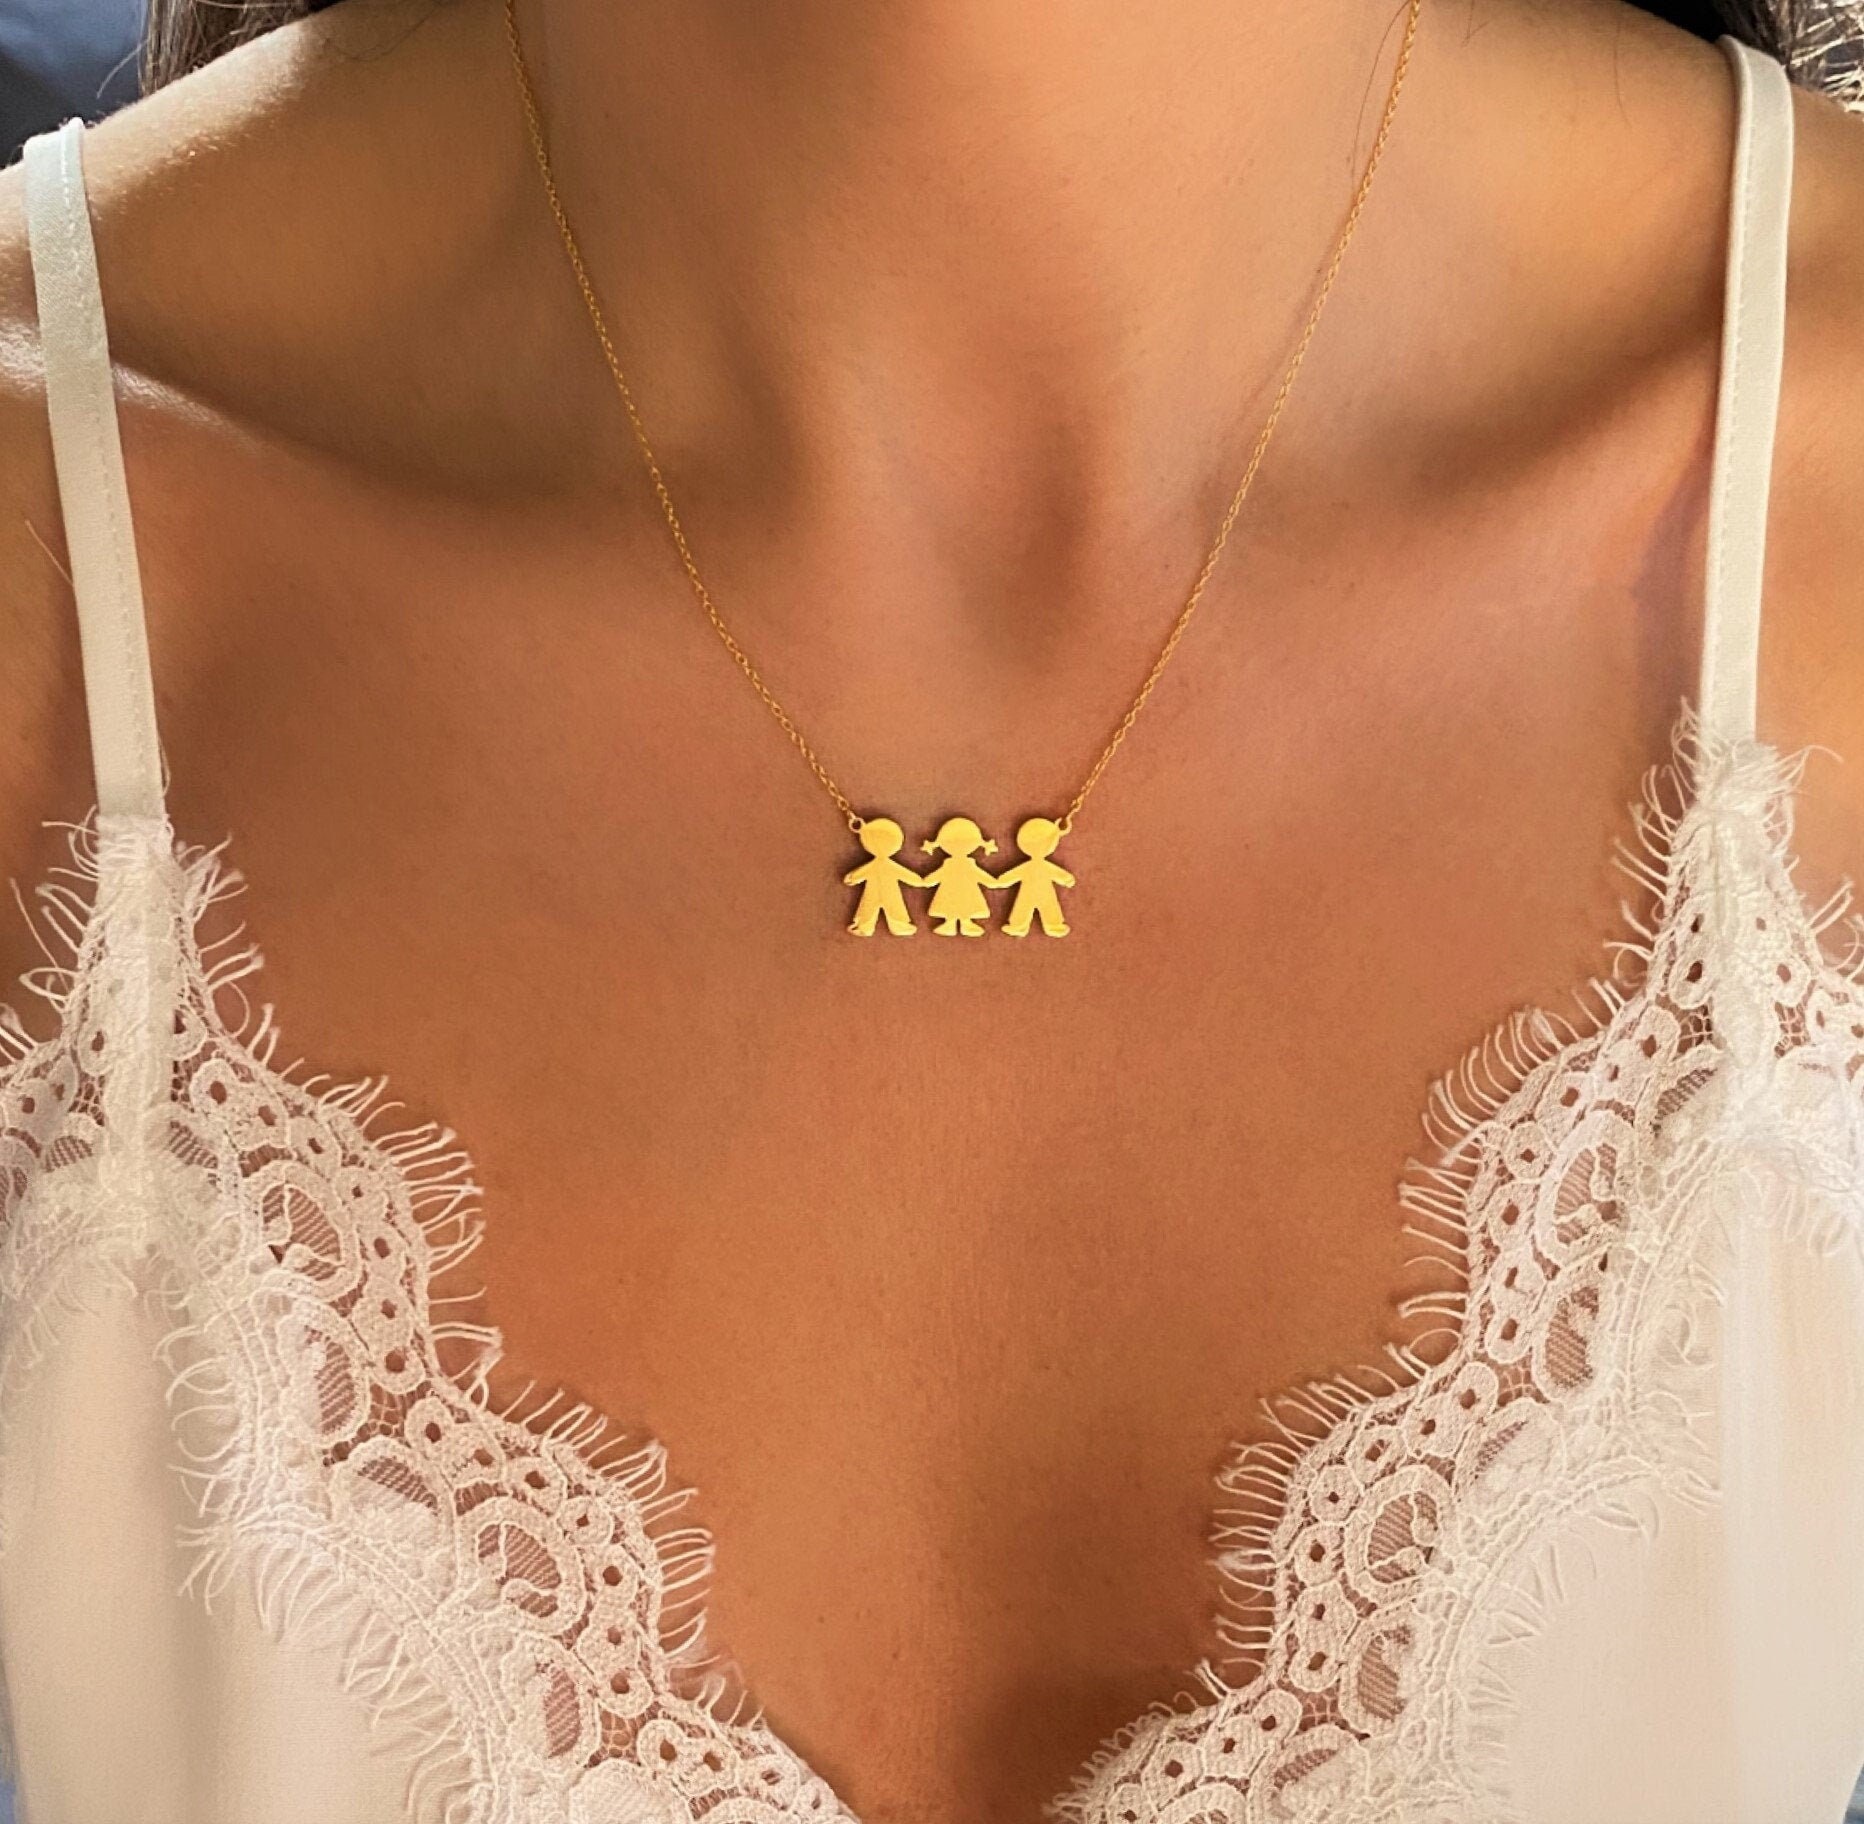 Personalized Mother Child Necklace 1-5 Kids Name Charm For Mom Grandma  Mother | eBay